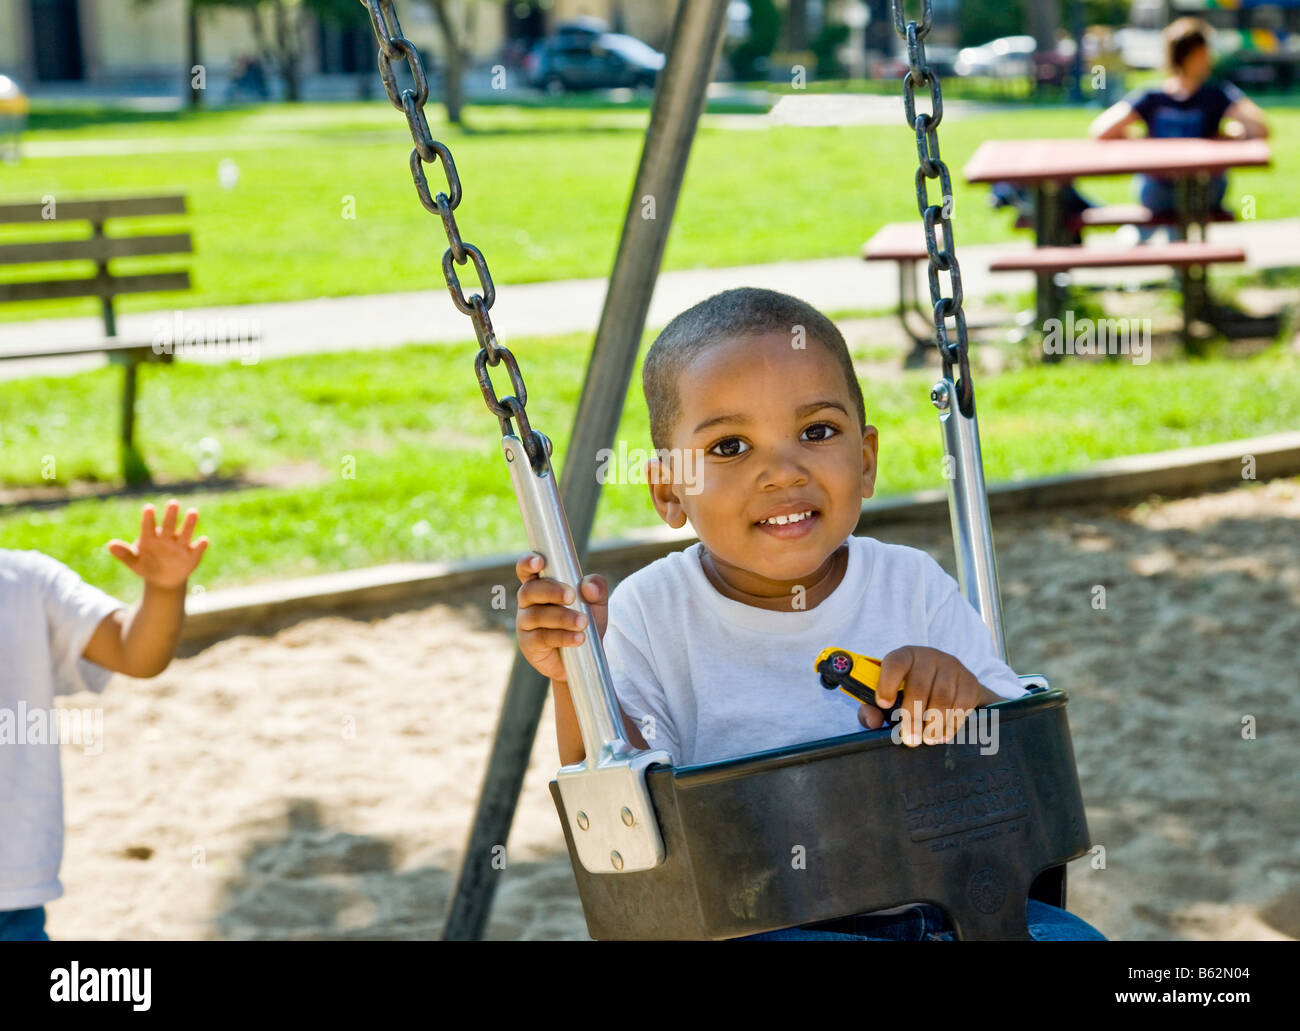 African-American male toddler being pushed on the swing set by his 4 year old brother on a city playground. Stock Photo